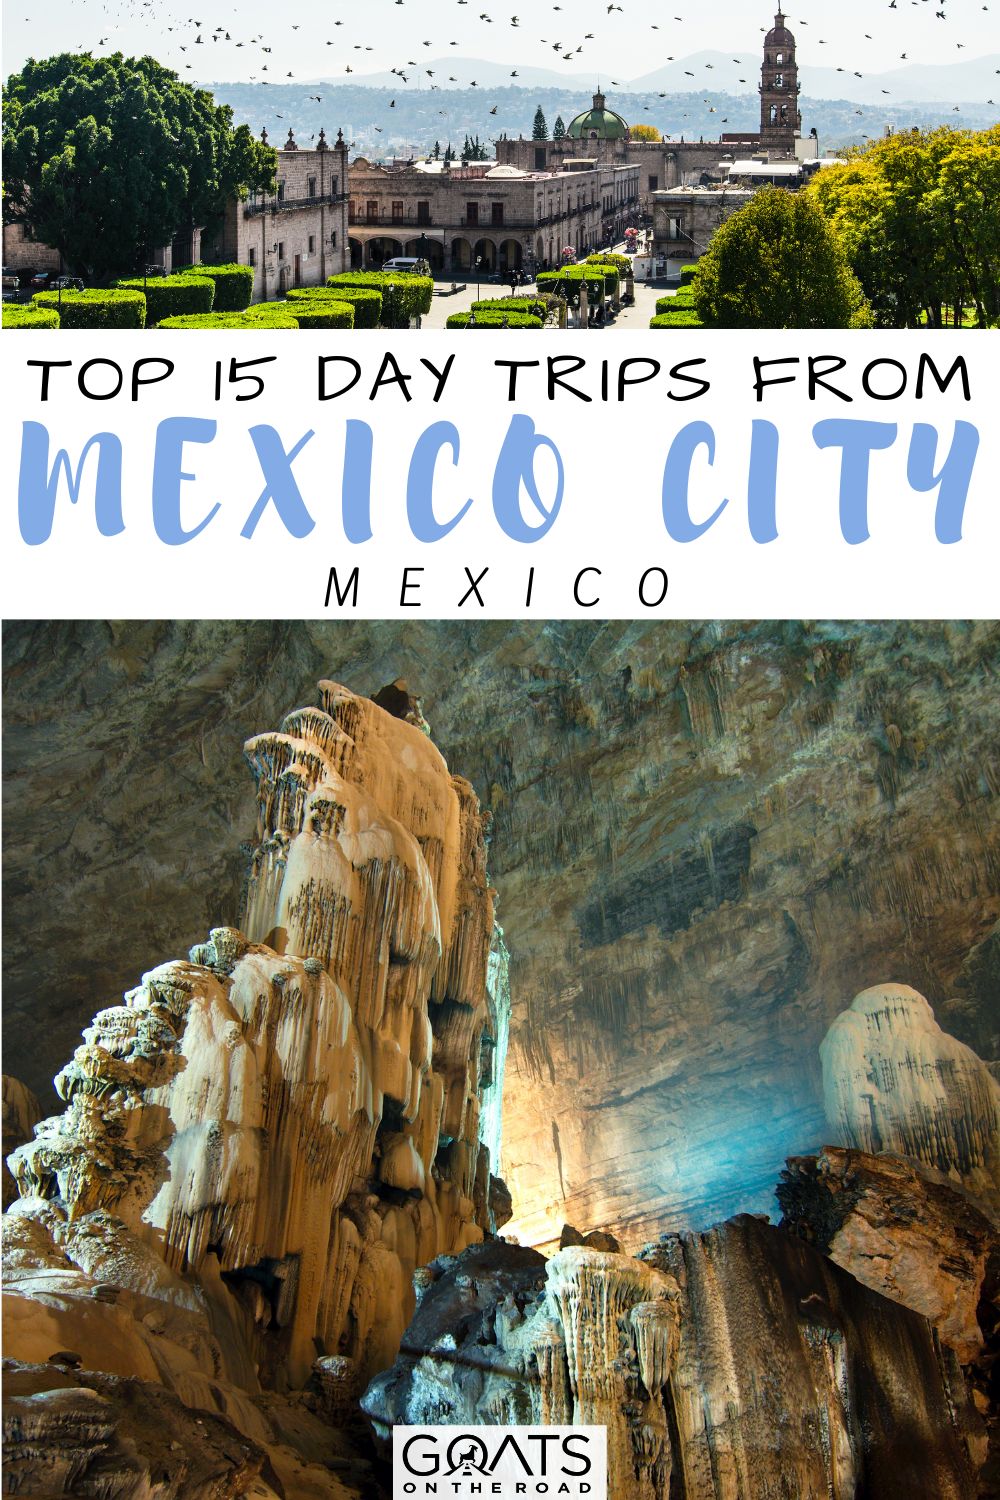 “Top 15 Day Trips from Mexico City, Mexico